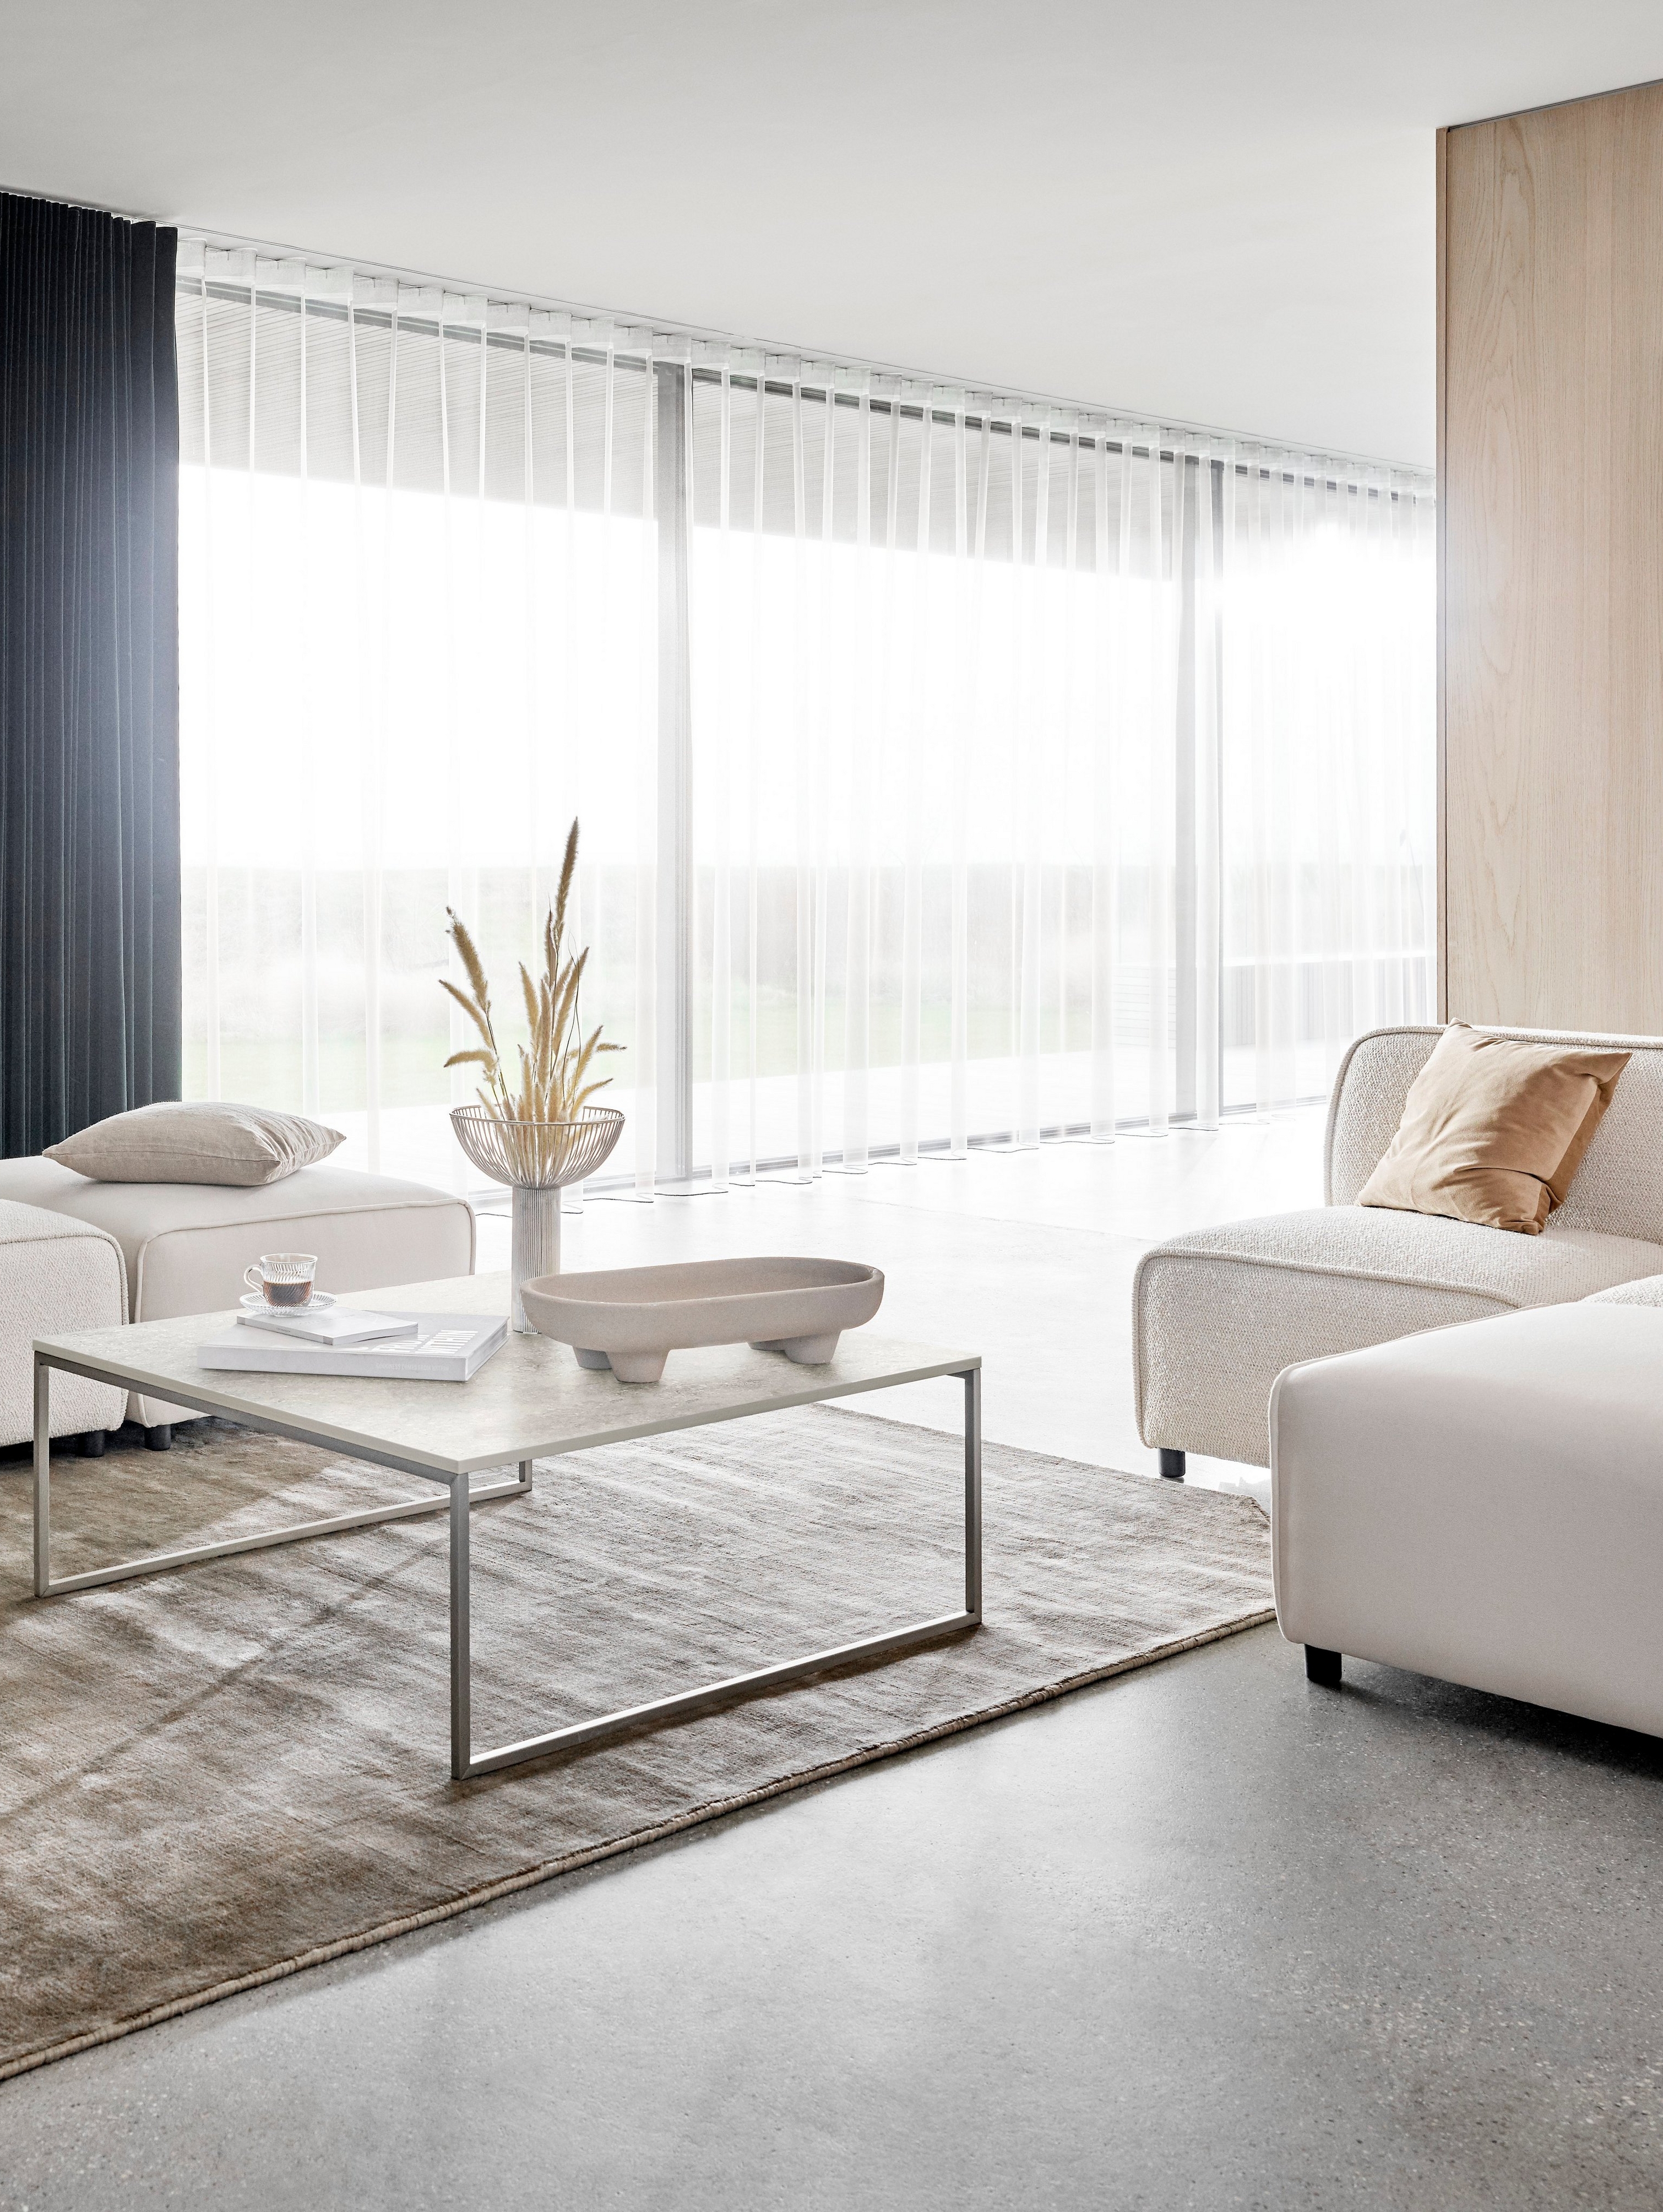 Carmo sofa with lounging unit and Carmo footstoll with the Lugo coffee table.